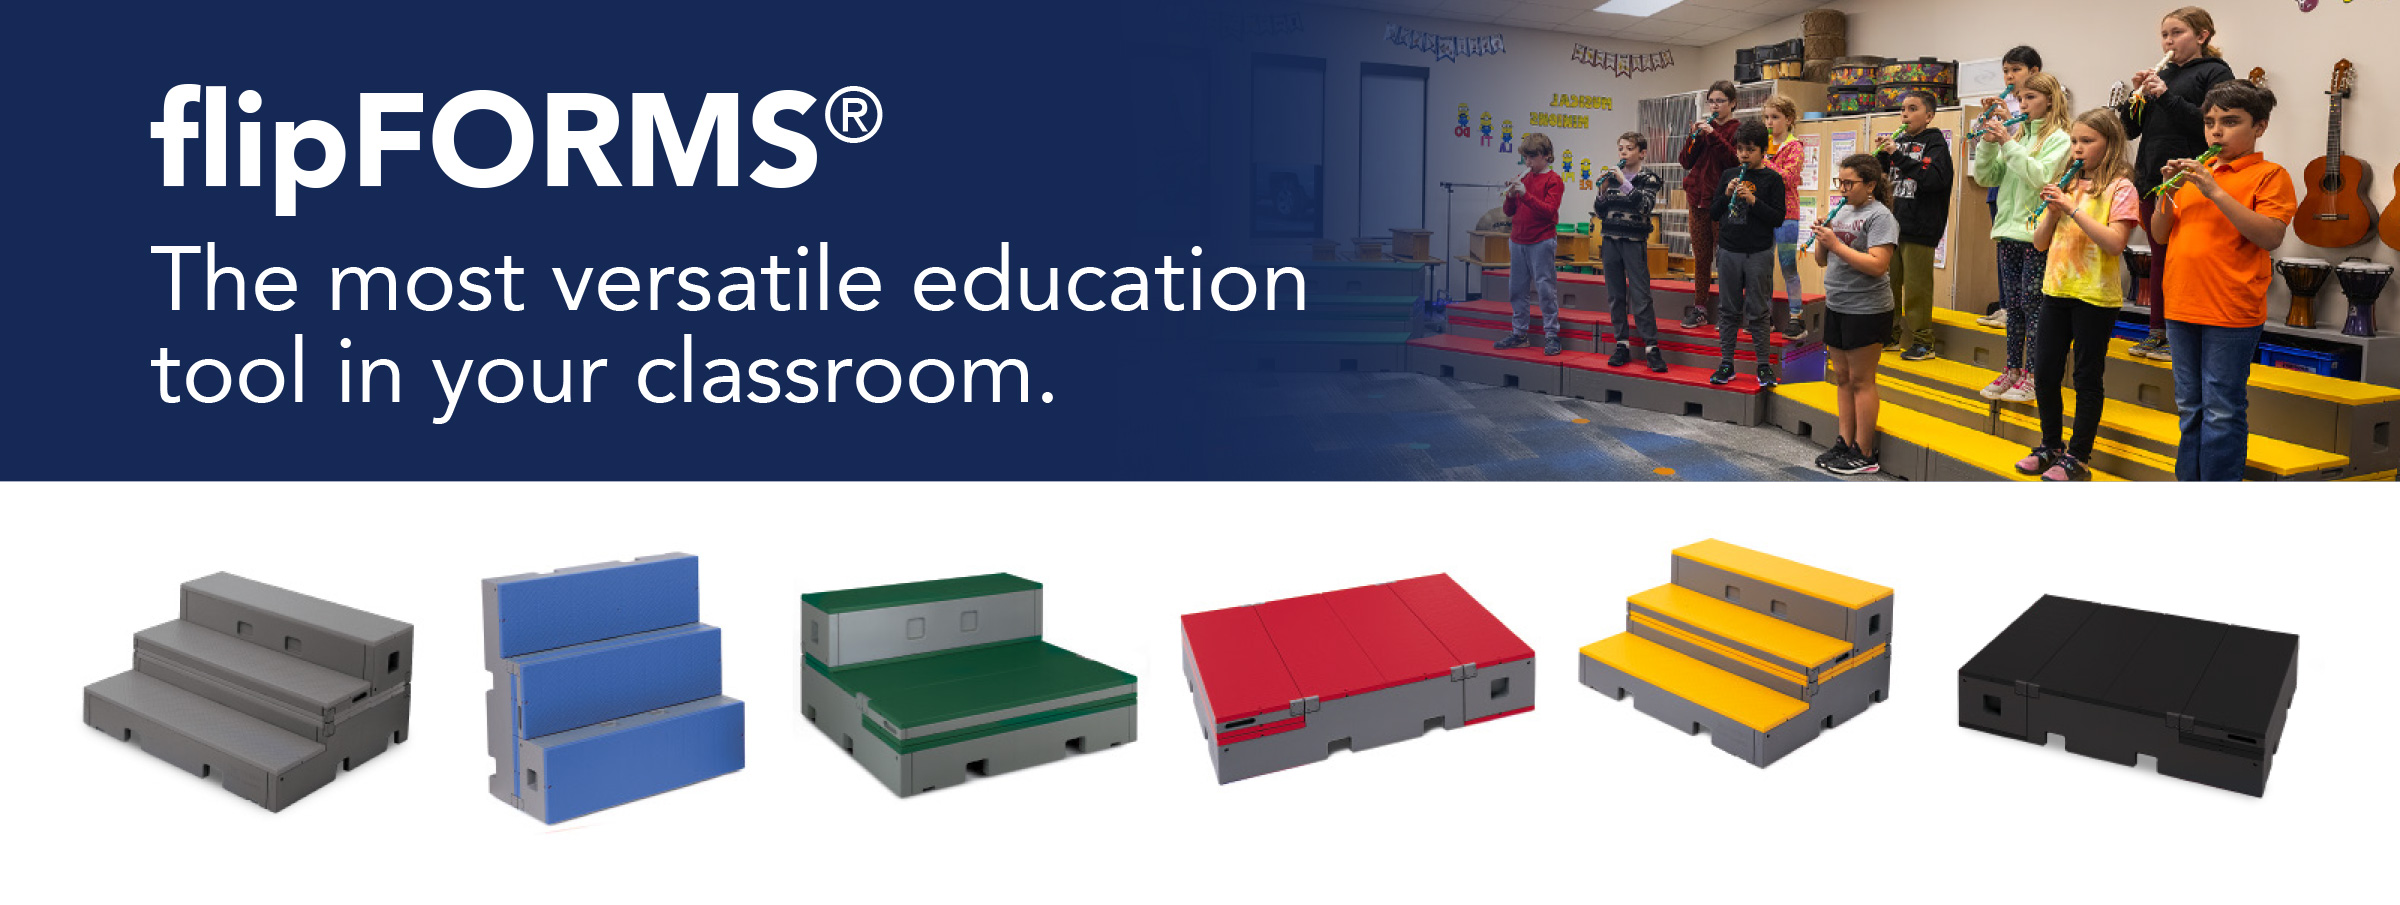 flipFORMS® The most versatile education tool in your classroom.